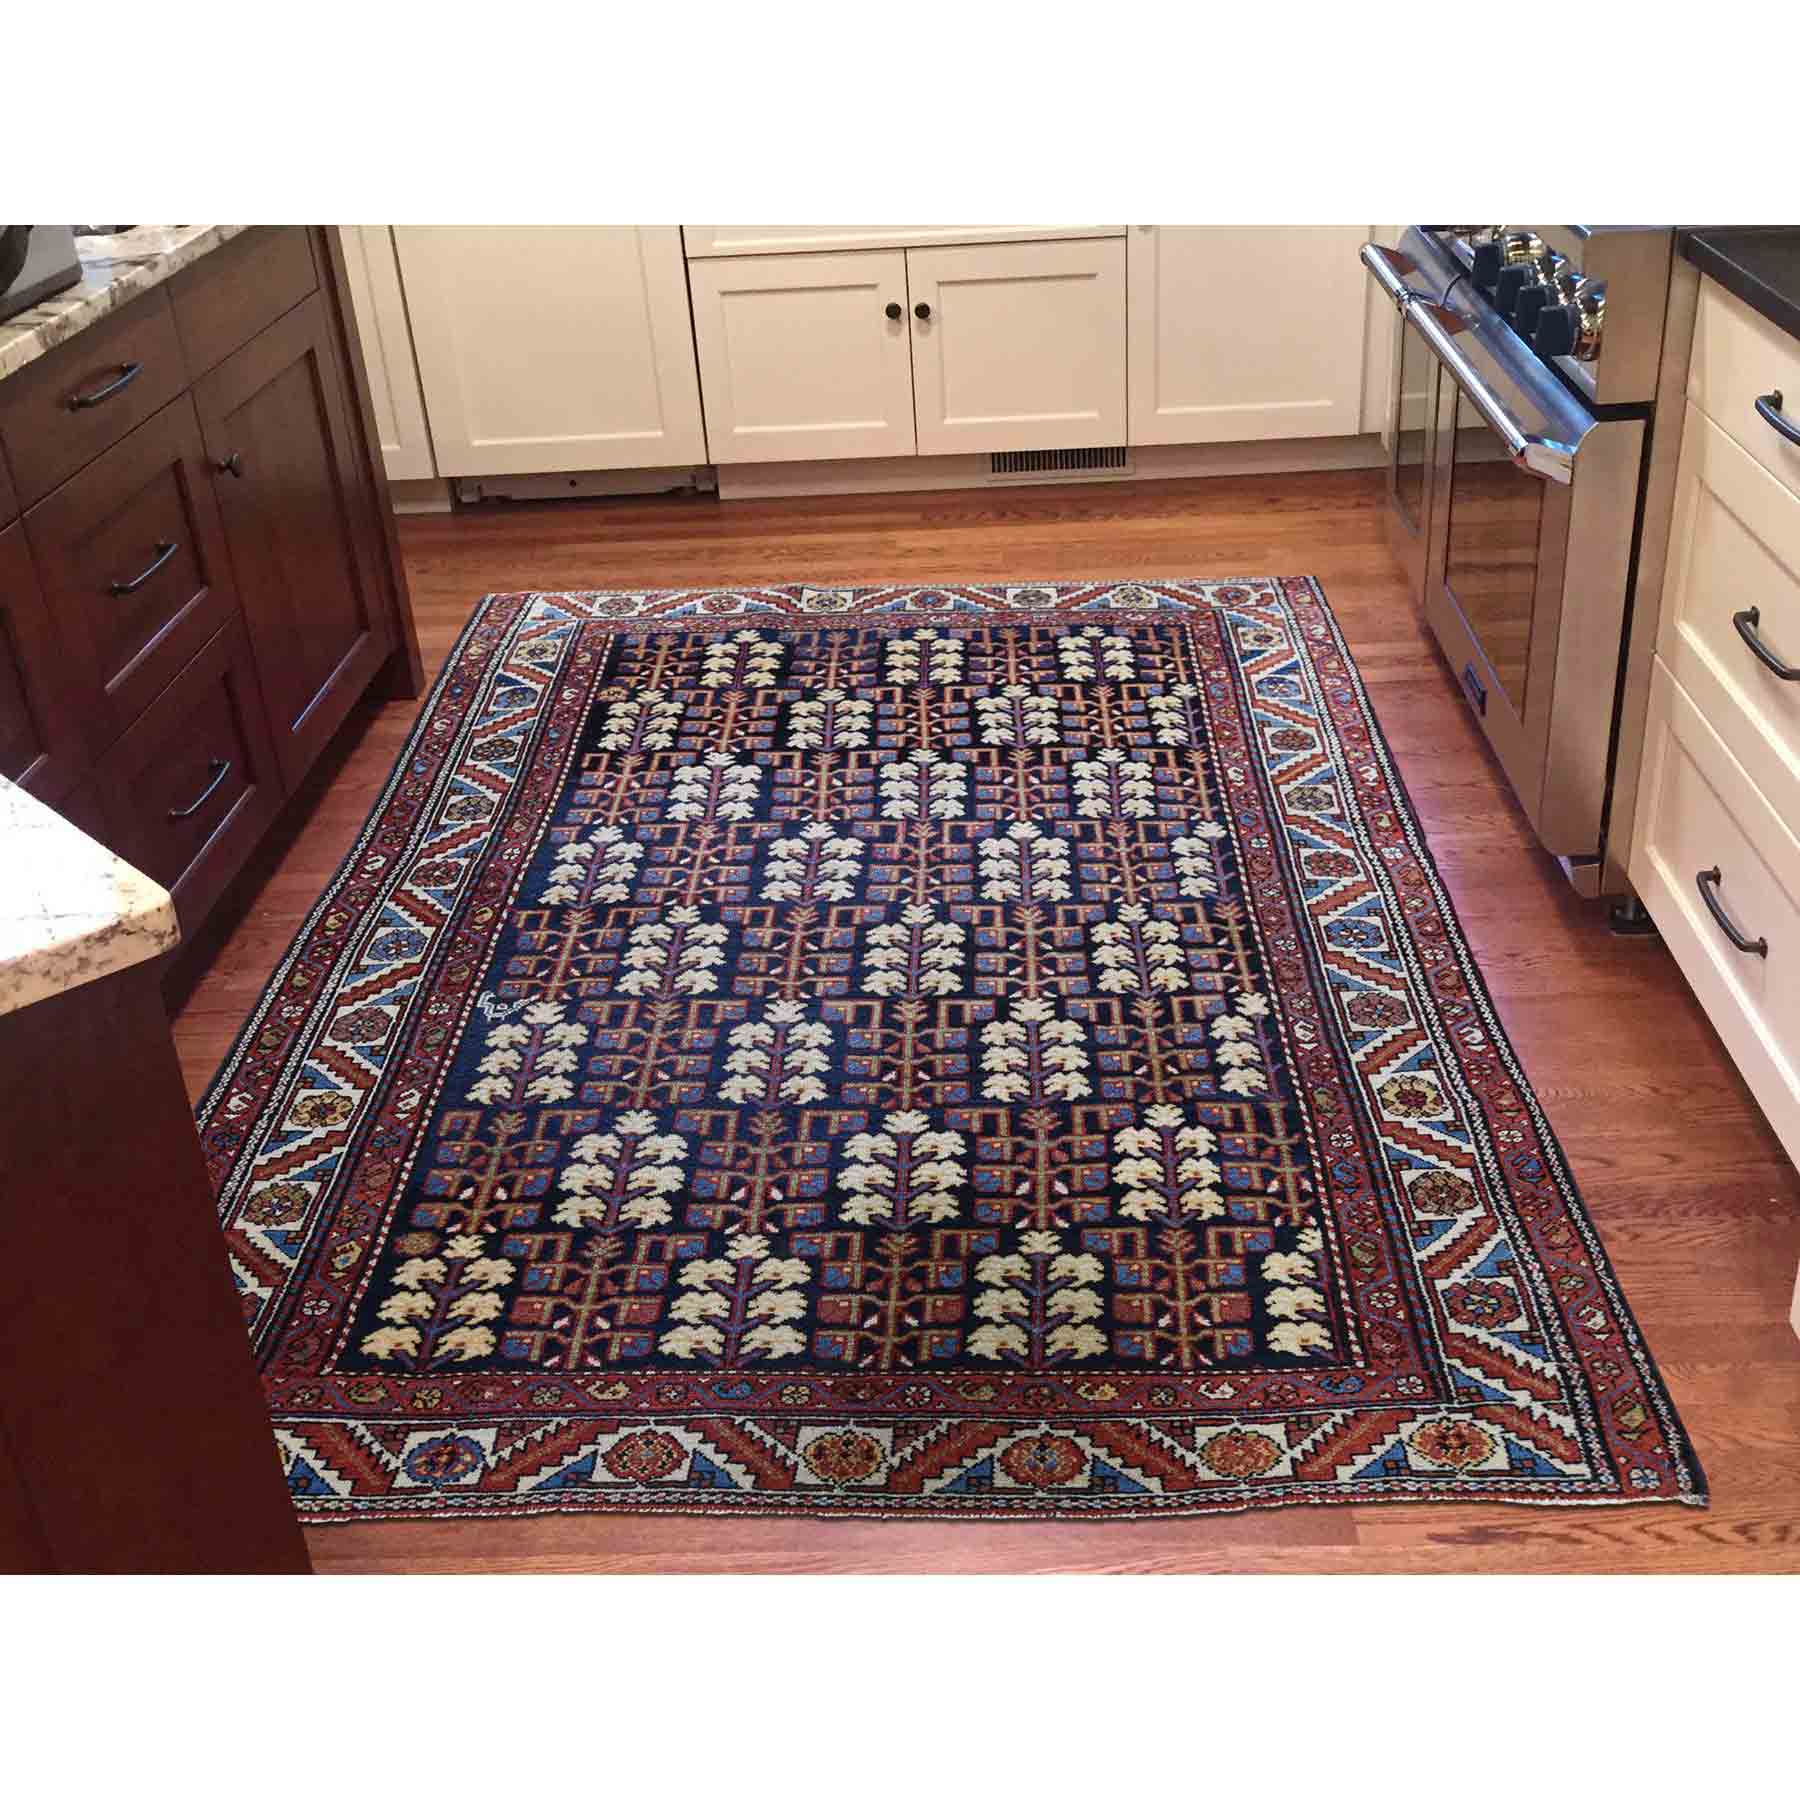 Antique-Hand-Knotted-Rug-229690